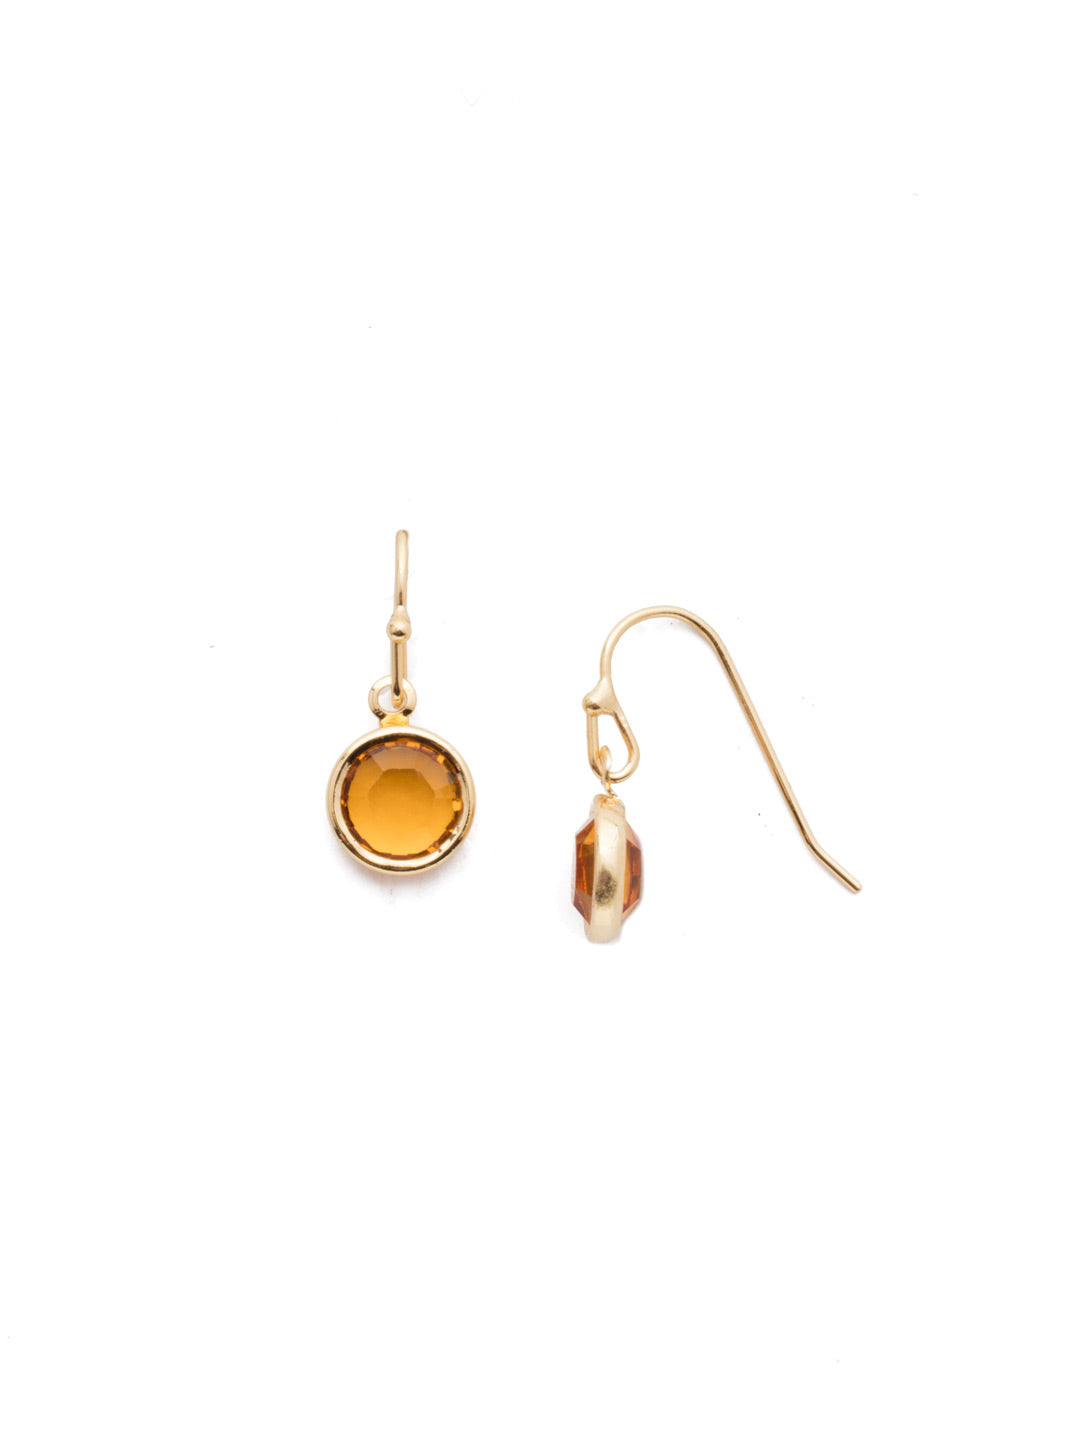 Dewdrop Dangle Earring - EEF73BGLPU - A drop of sparkle is always in style. Add a touch with this pair of drop earrings. From Sorrelli's Love Purple collection in our Bright Gold-tone finish.